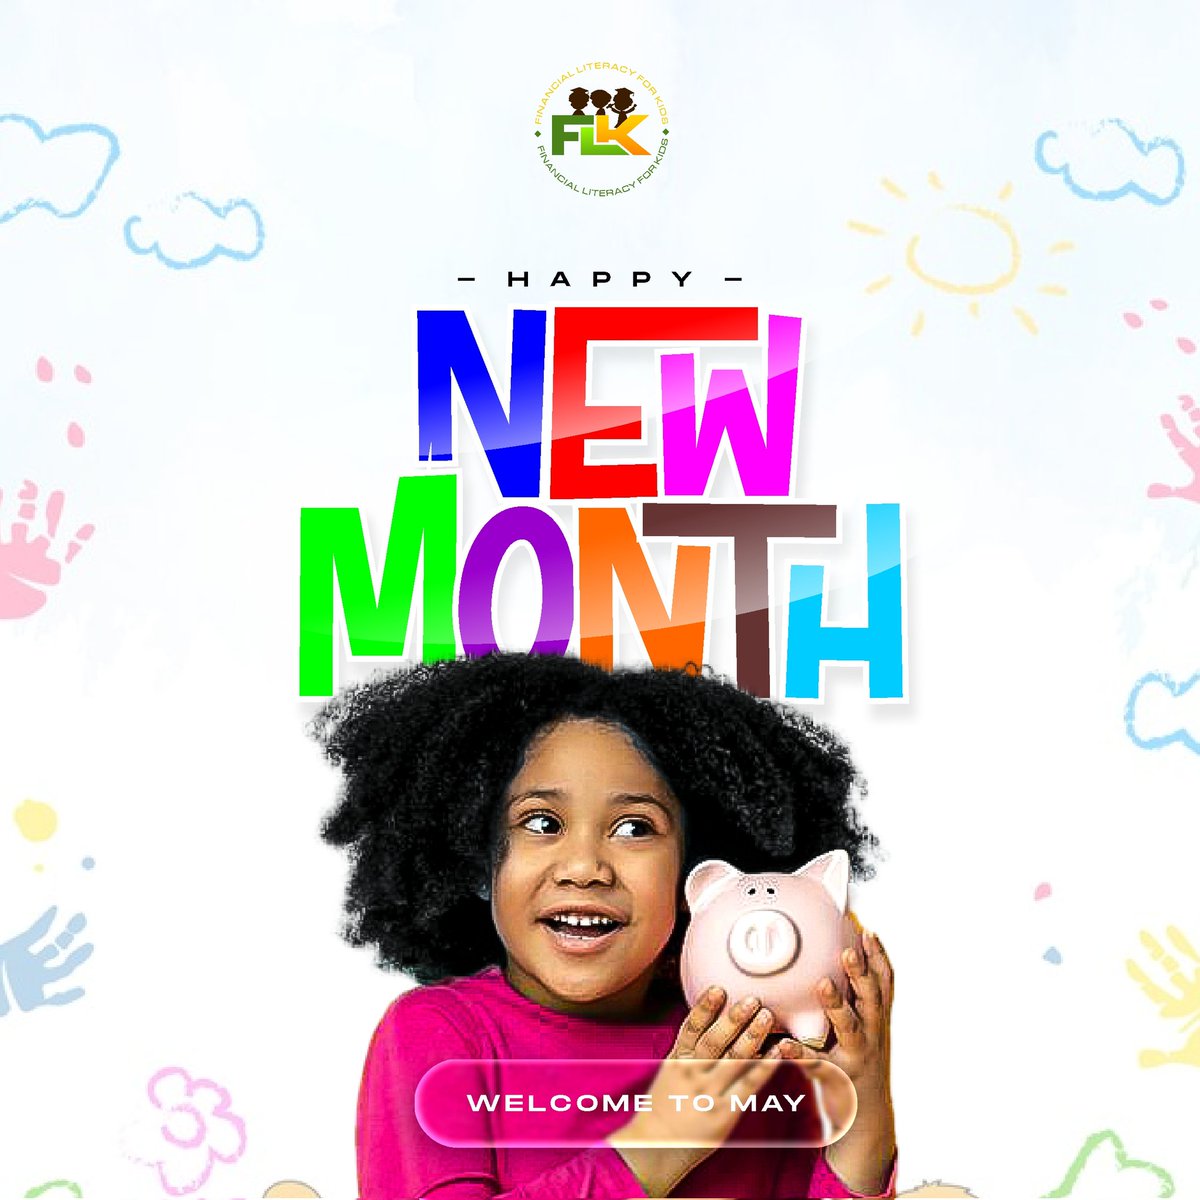 Hello May!
Let's focus on learning this month...

Happy New Month from all of us at FLK @financialliteracy4kids 

#finlit4kids #financialliteracyforkids #may